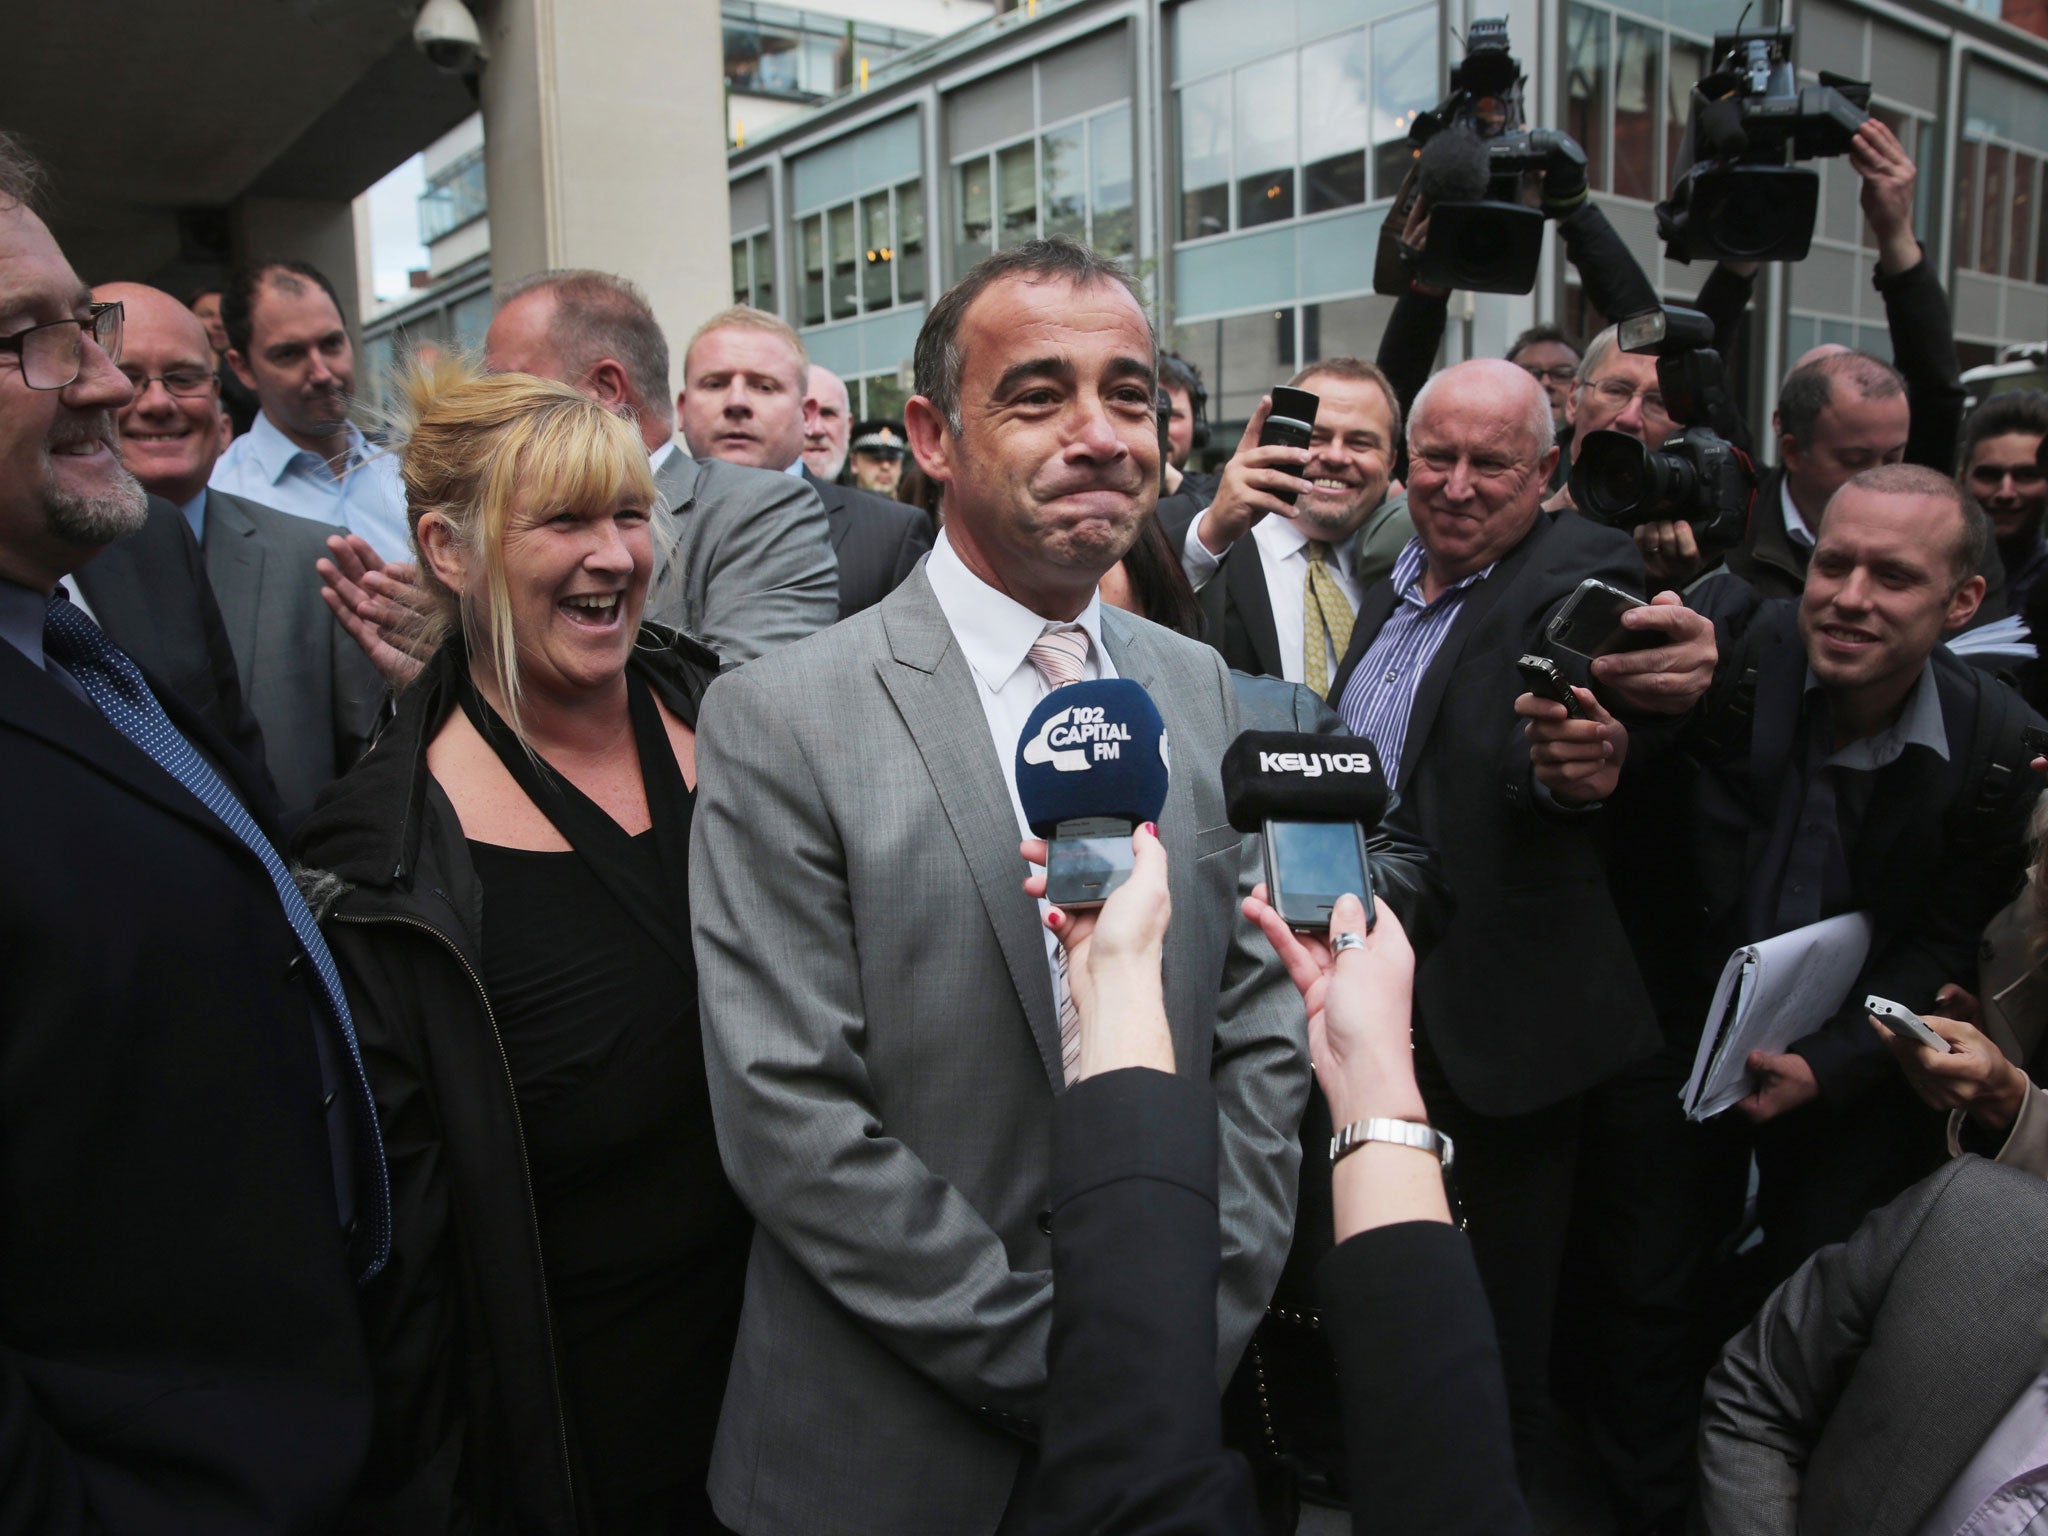 Michael Le Vell, who plays Kevin Webster in the TV soap Coronation Street, makes a statement to the press after being found not guilty at Manchester Crown Court for alleged child sex offences on September 10, 2013 in Manchester, England.